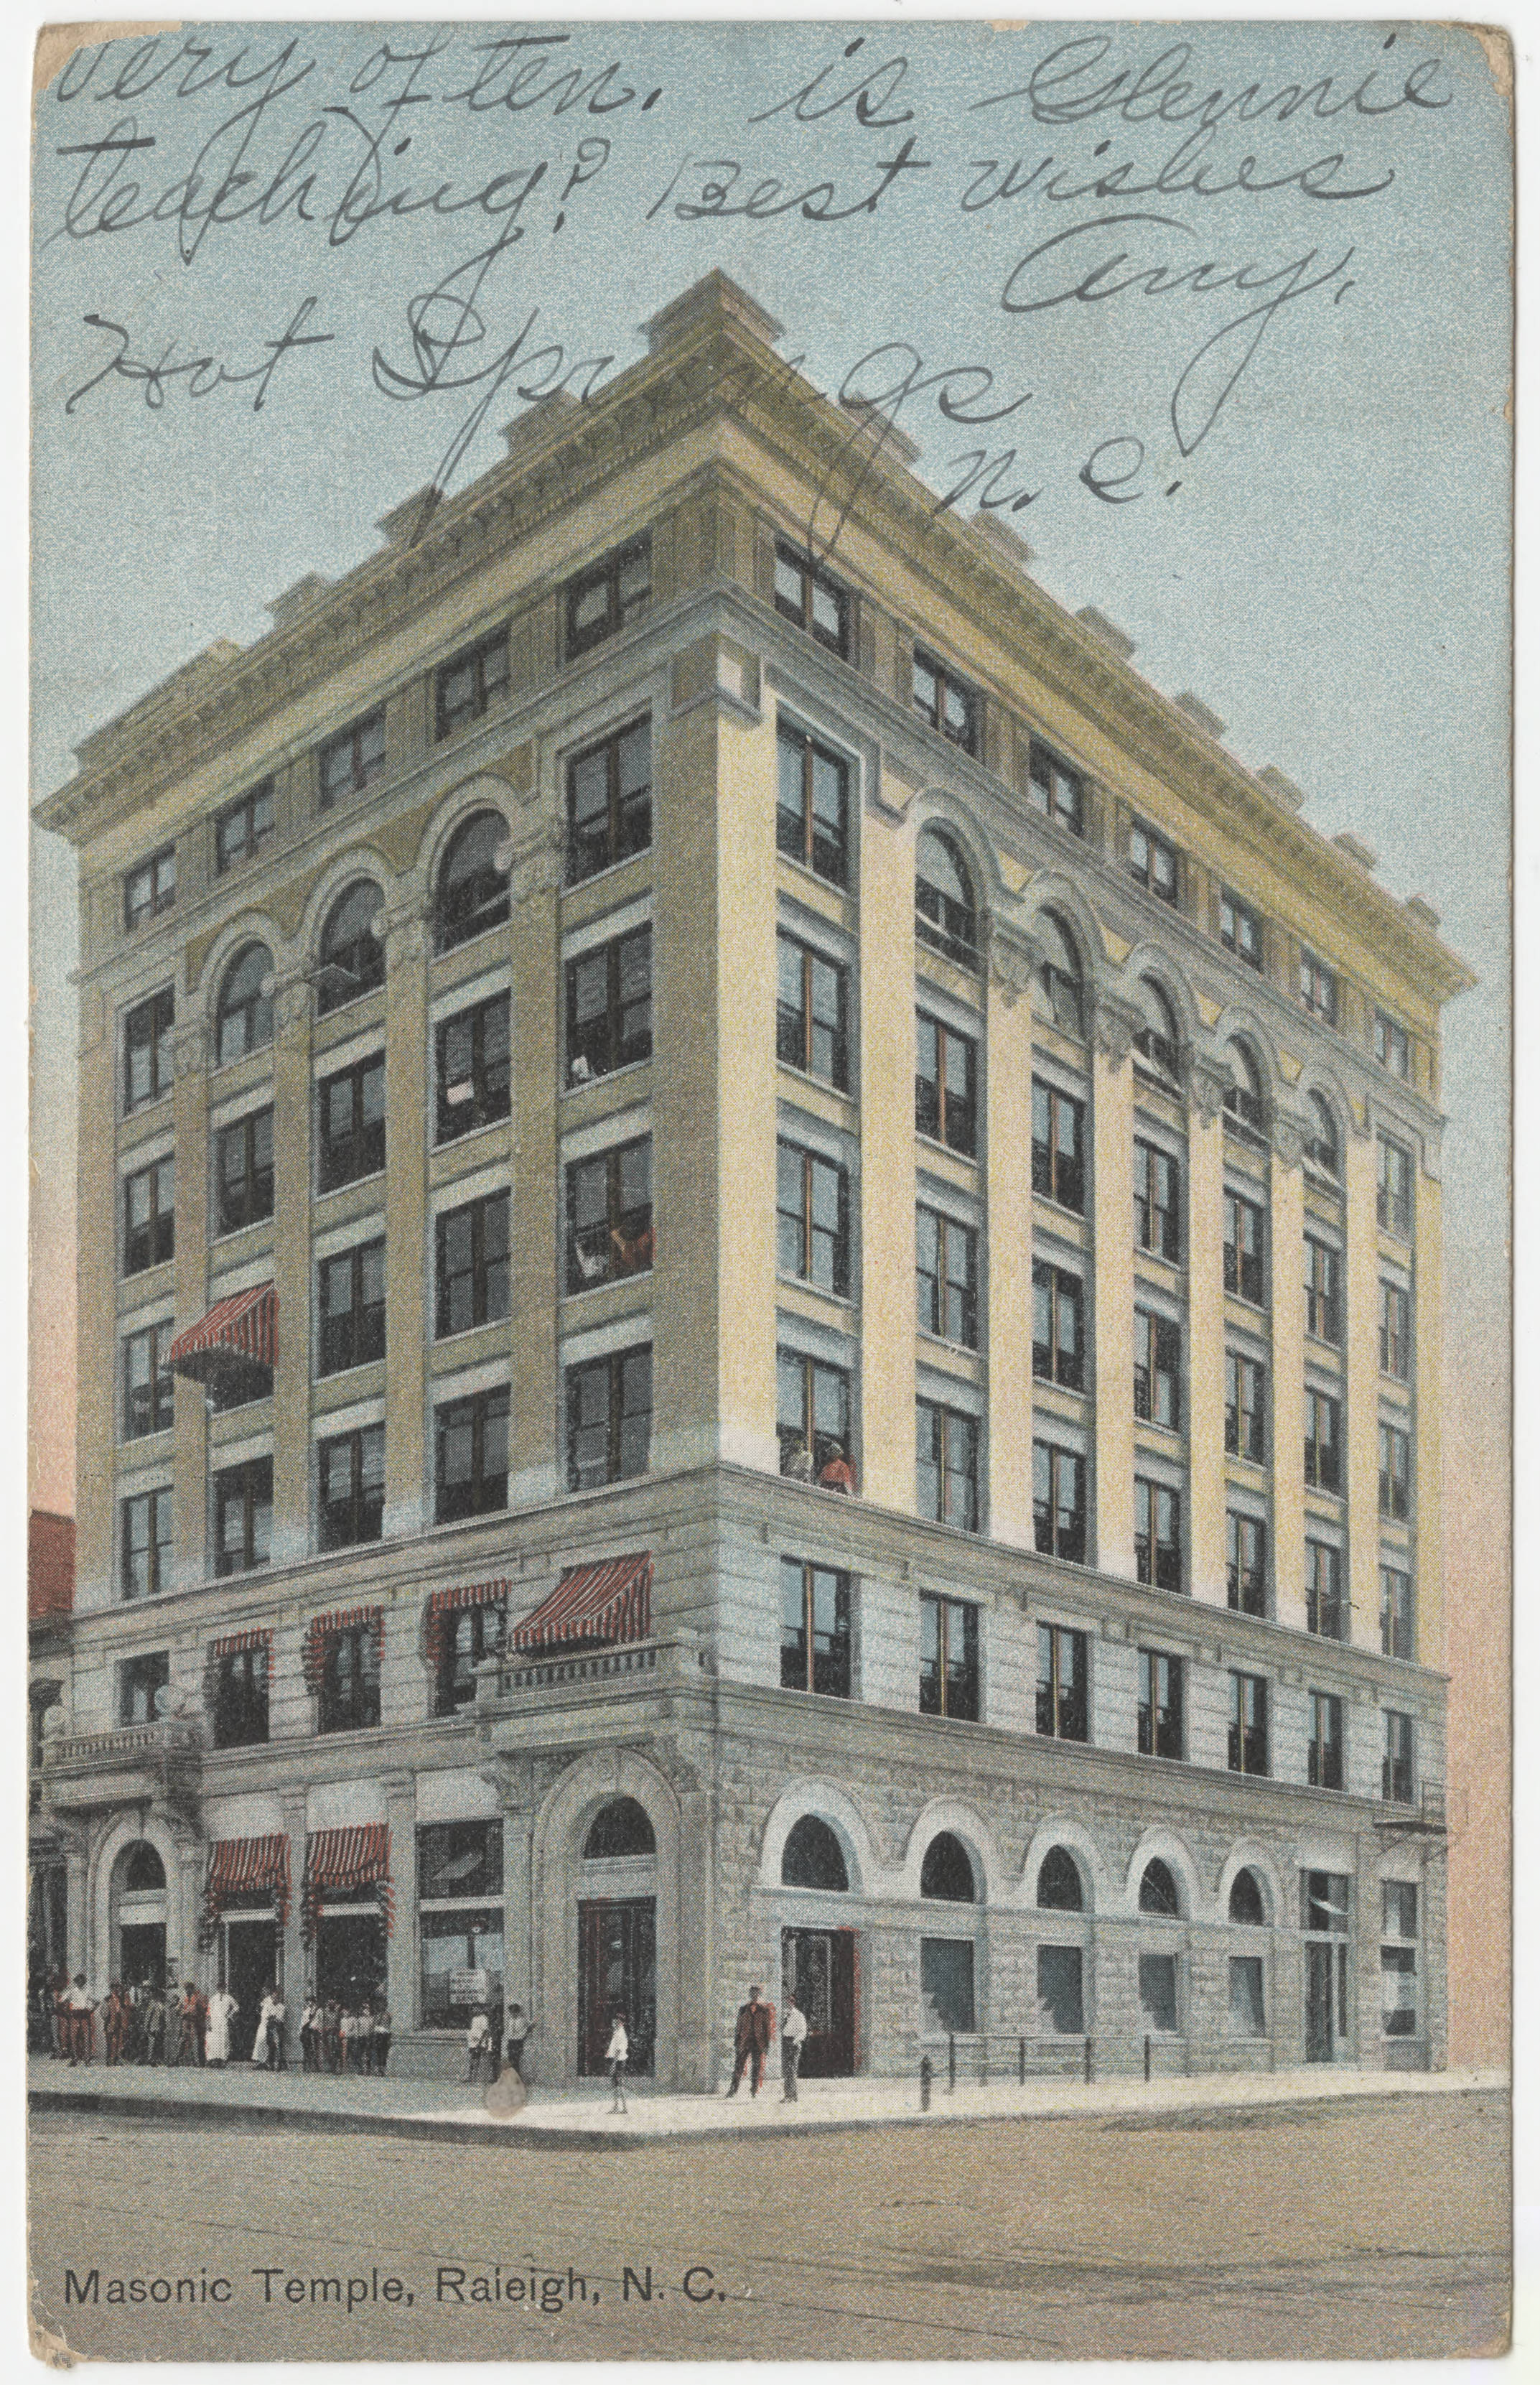 Historic image showing the Masonic Temple, Raleigh